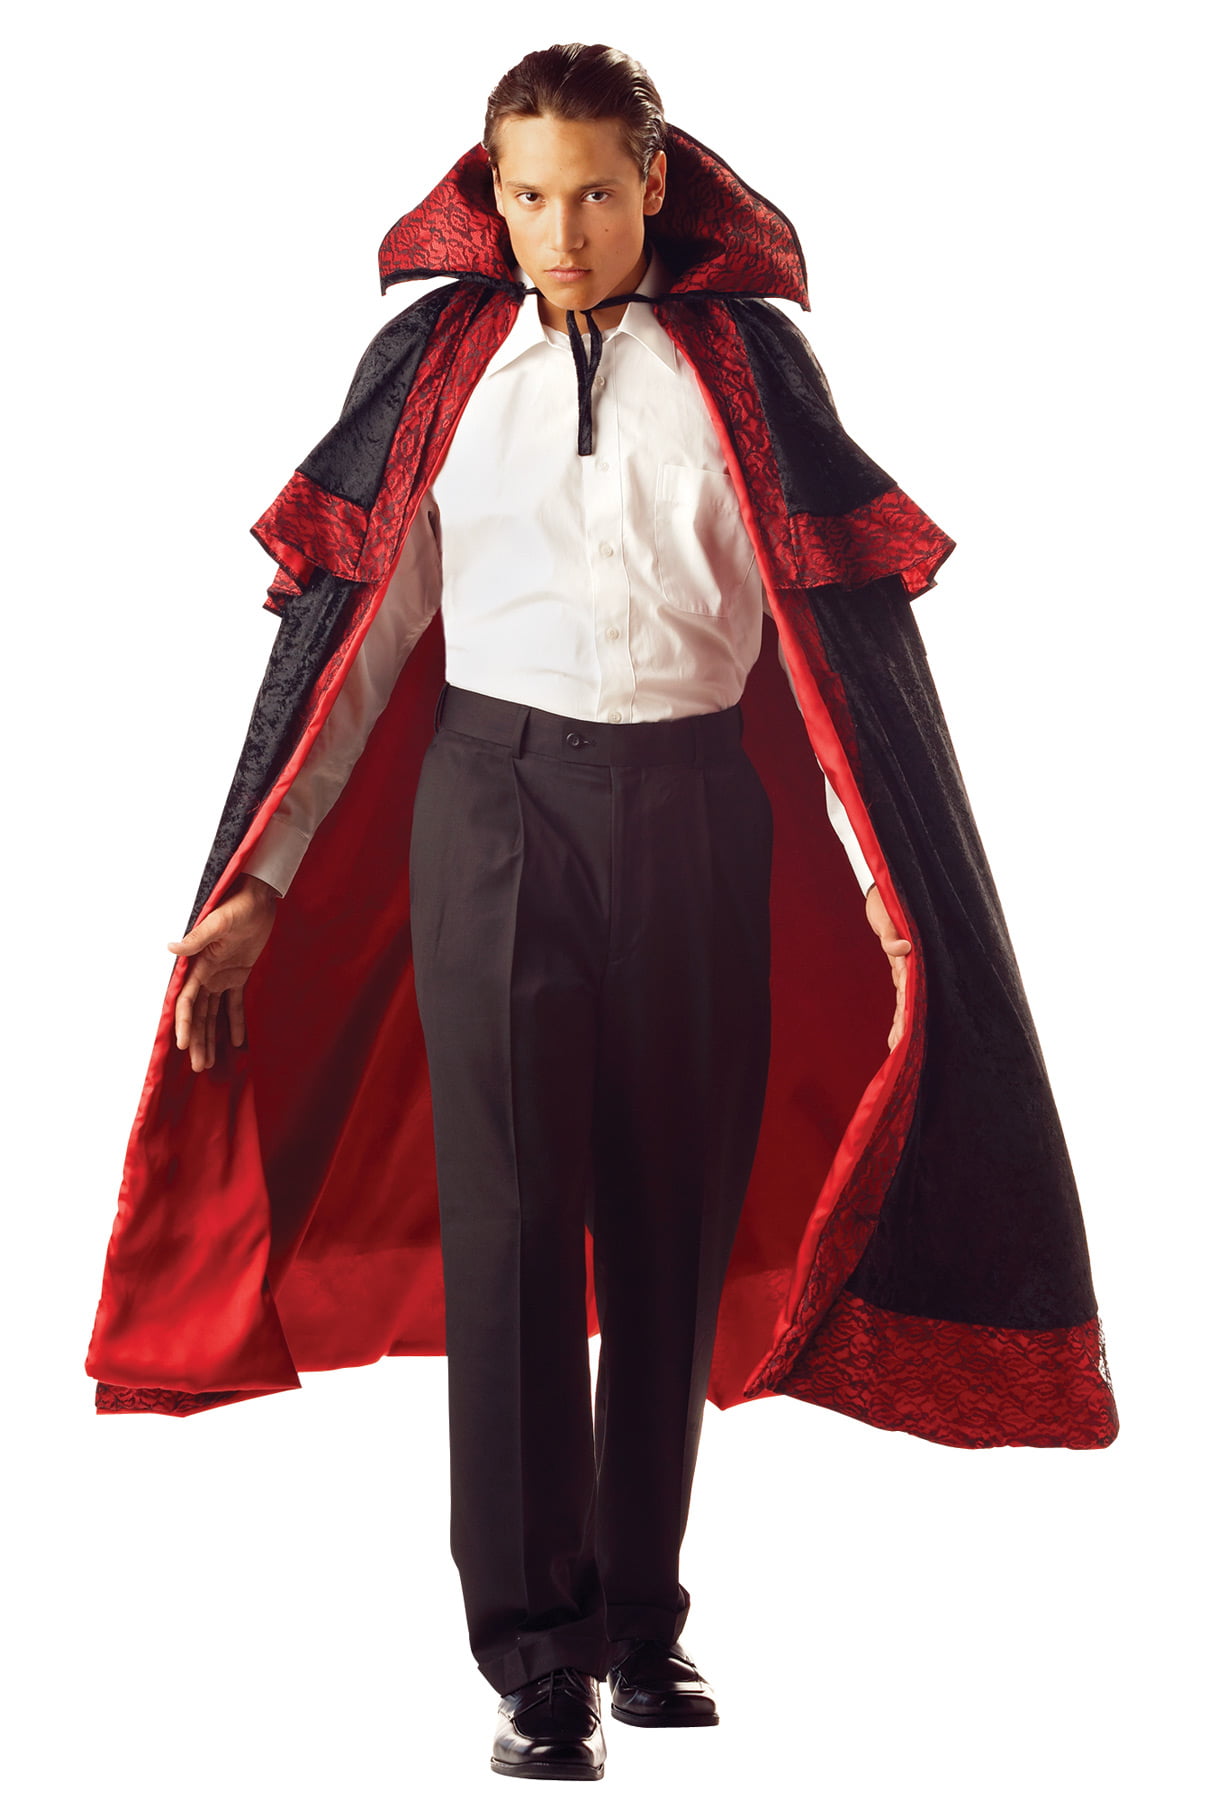 Adult Mens 56 Inch Deluxe Satin Vampire Cape Black Red Costume One Size Dress Up 